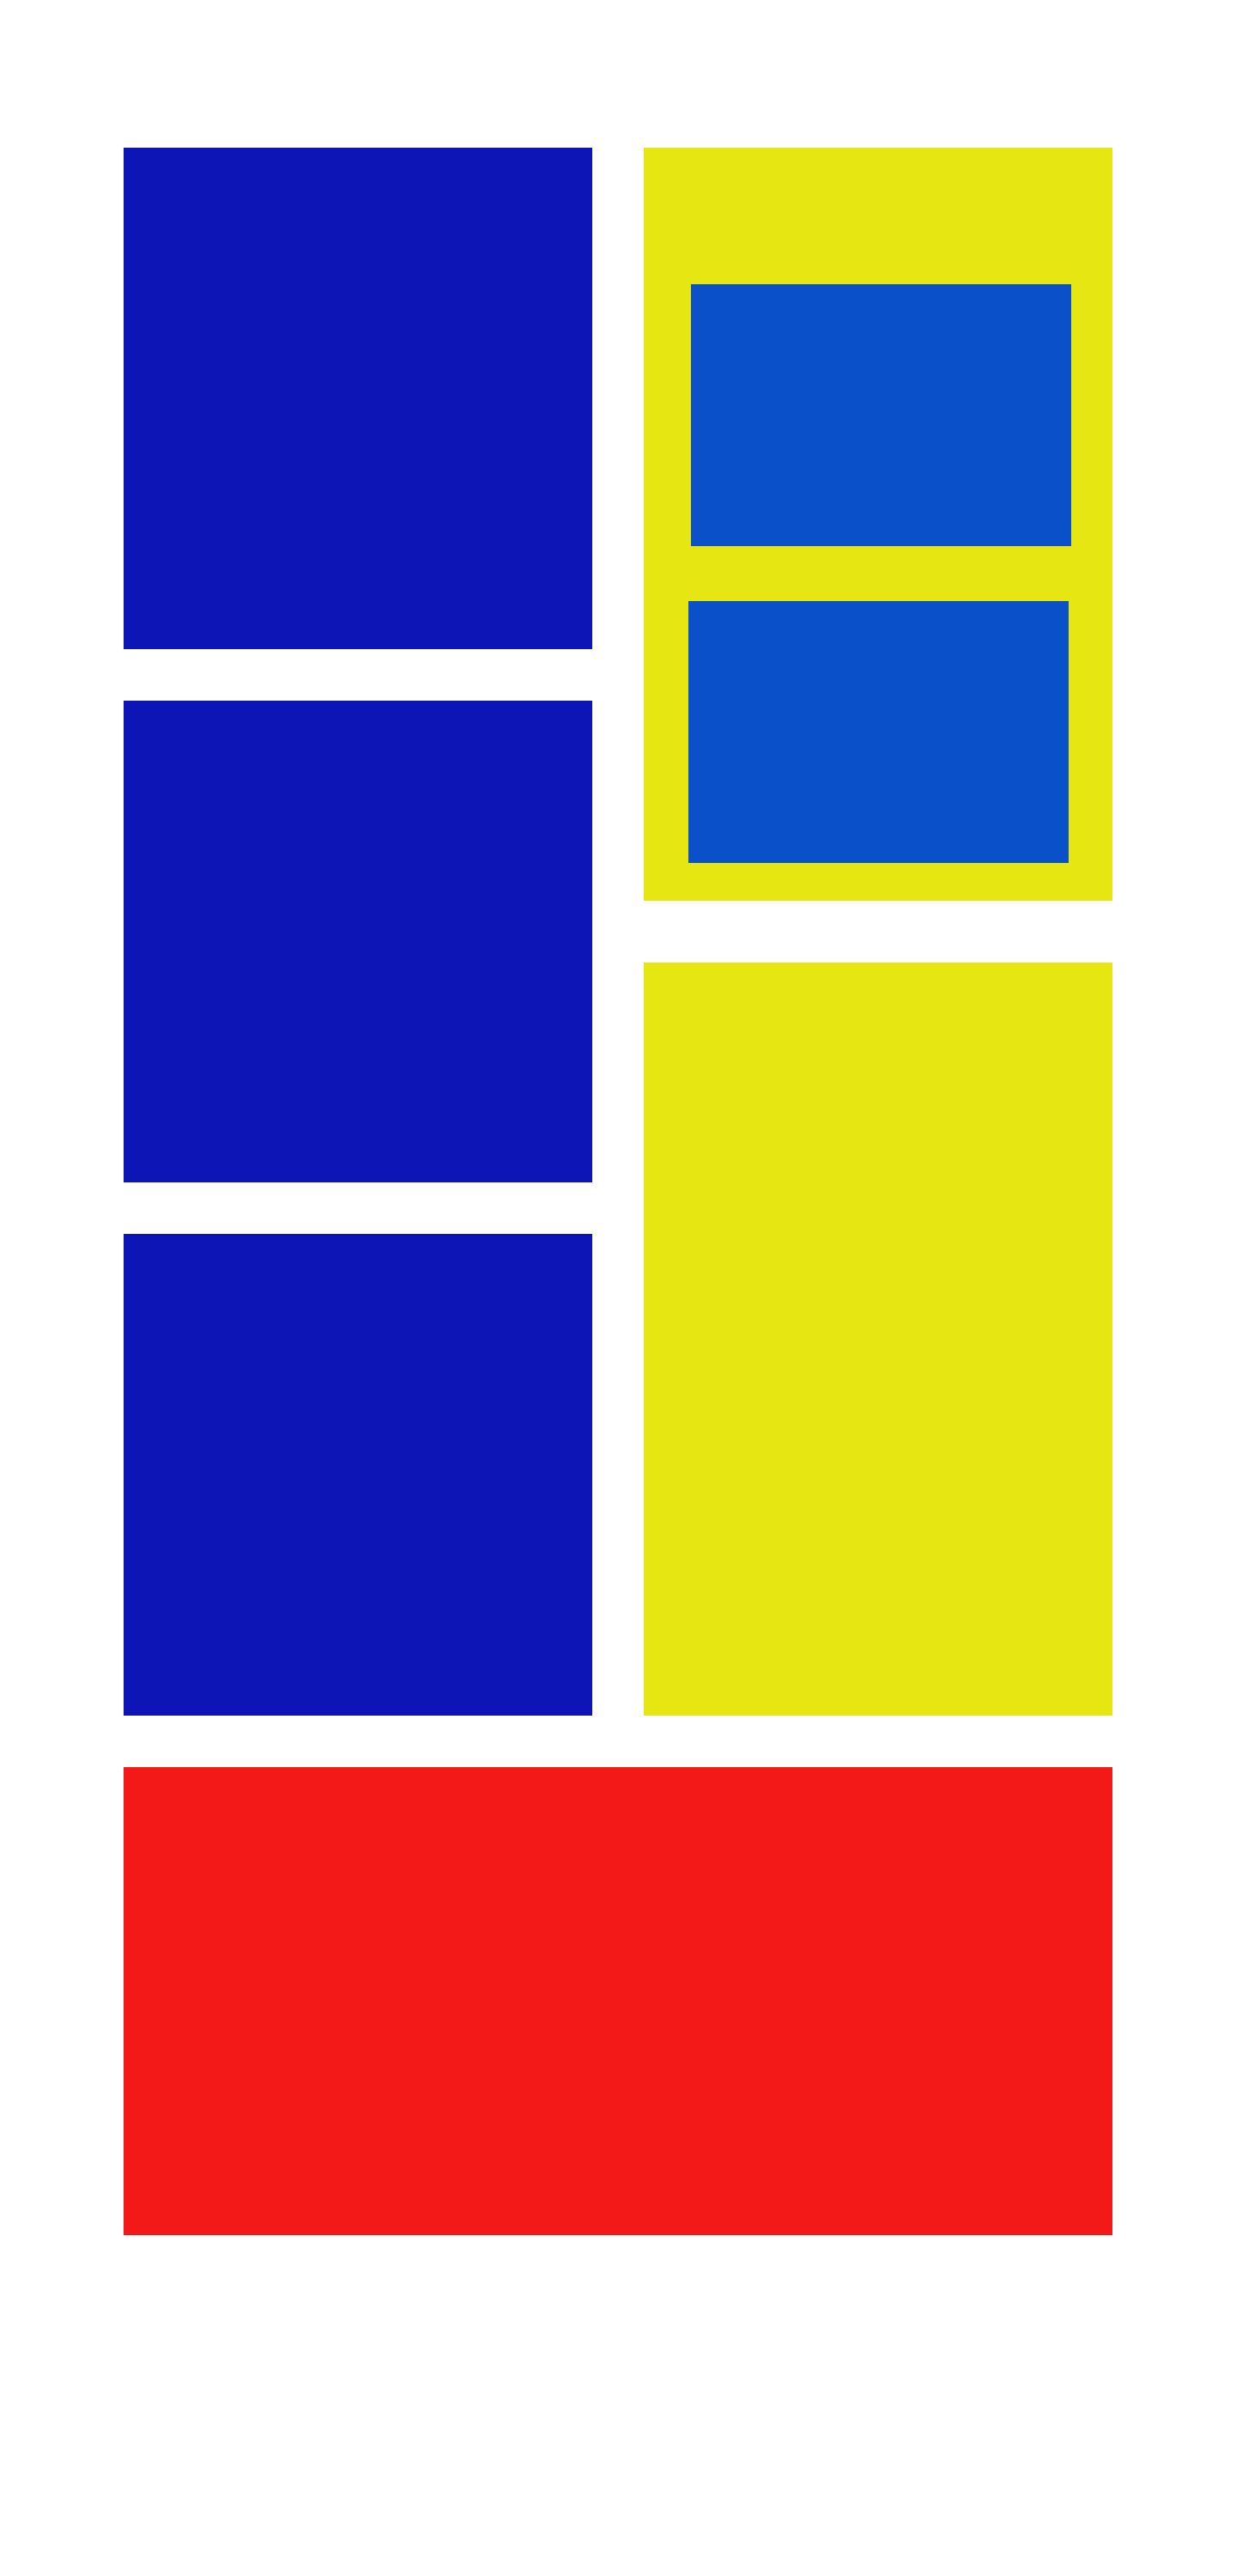 yellow, blue, red and squares